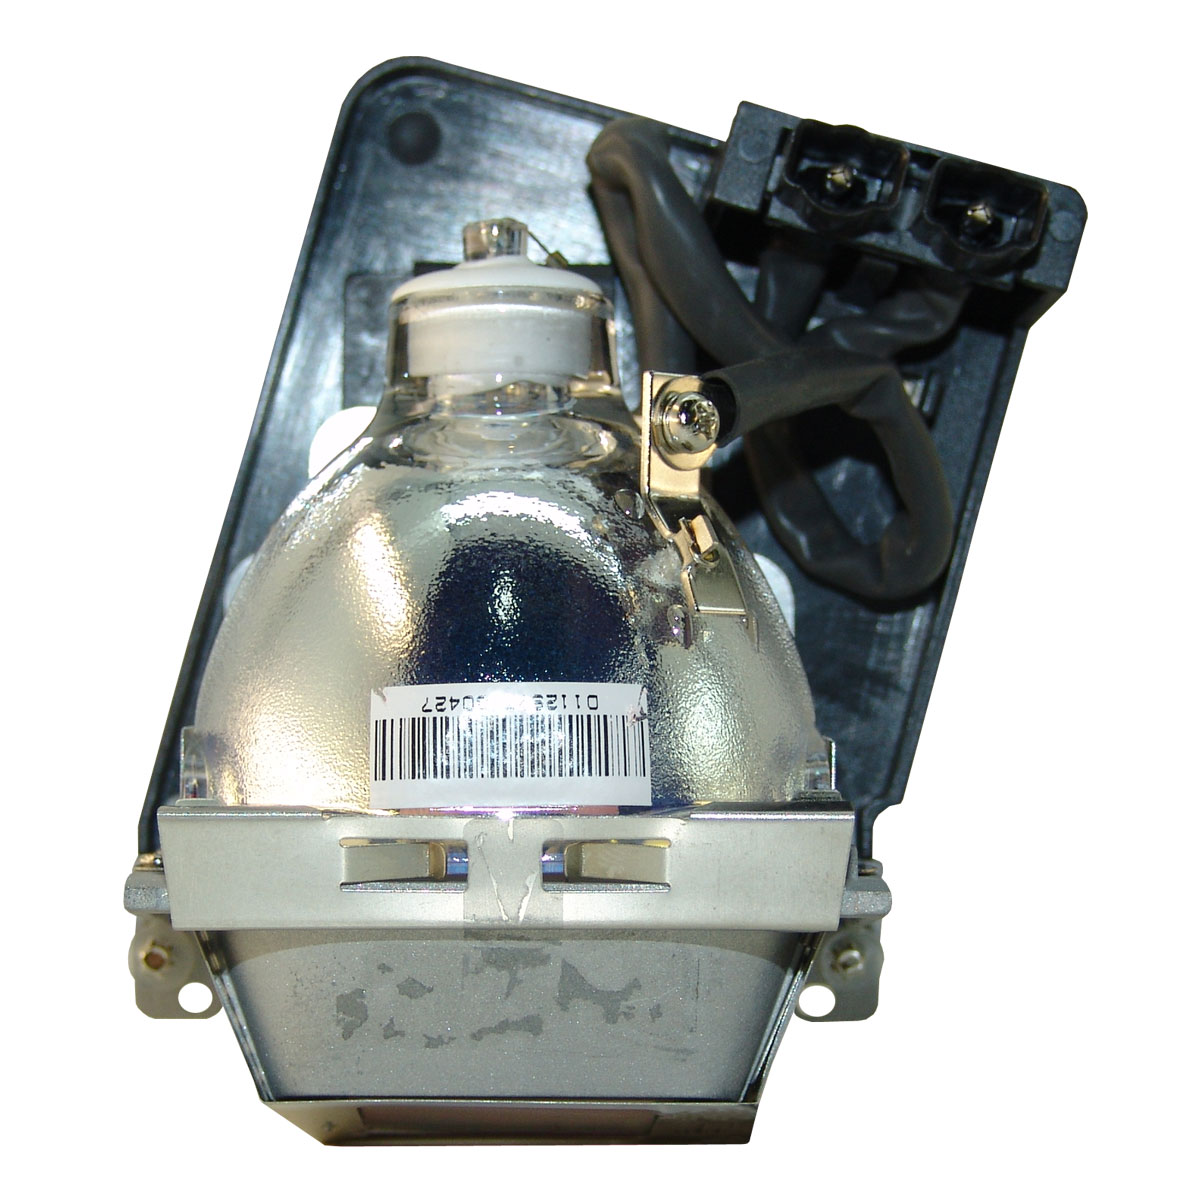 Buyquest L2139A  Genuine Compatible Replacement Projector Lamp for HP. Includes New P-VIP 300W Bulb and Housing